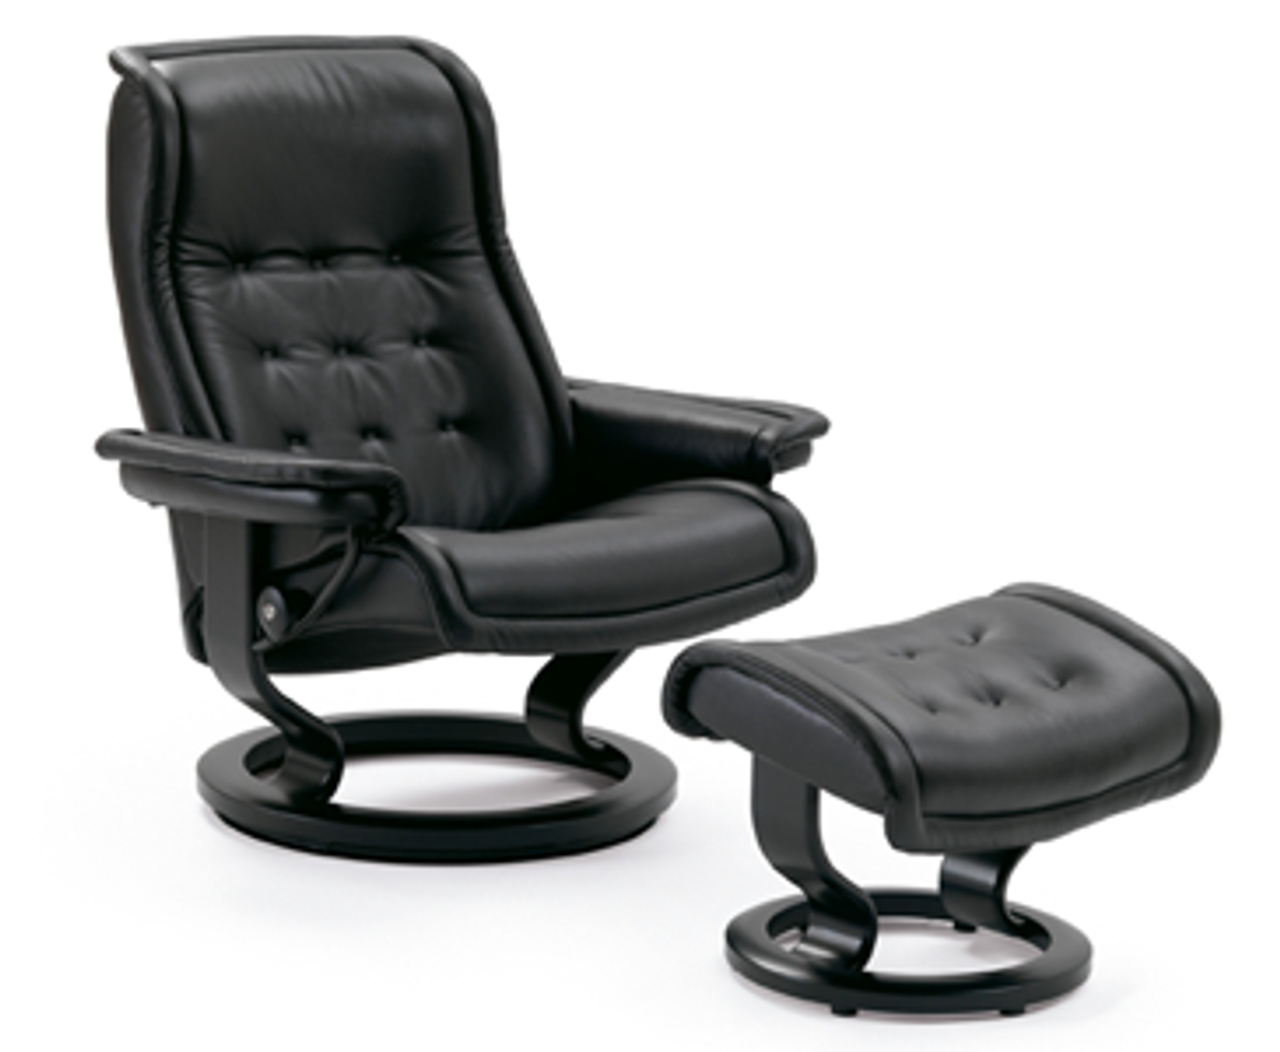 Prince Swivel Leather Recliner with ottoman